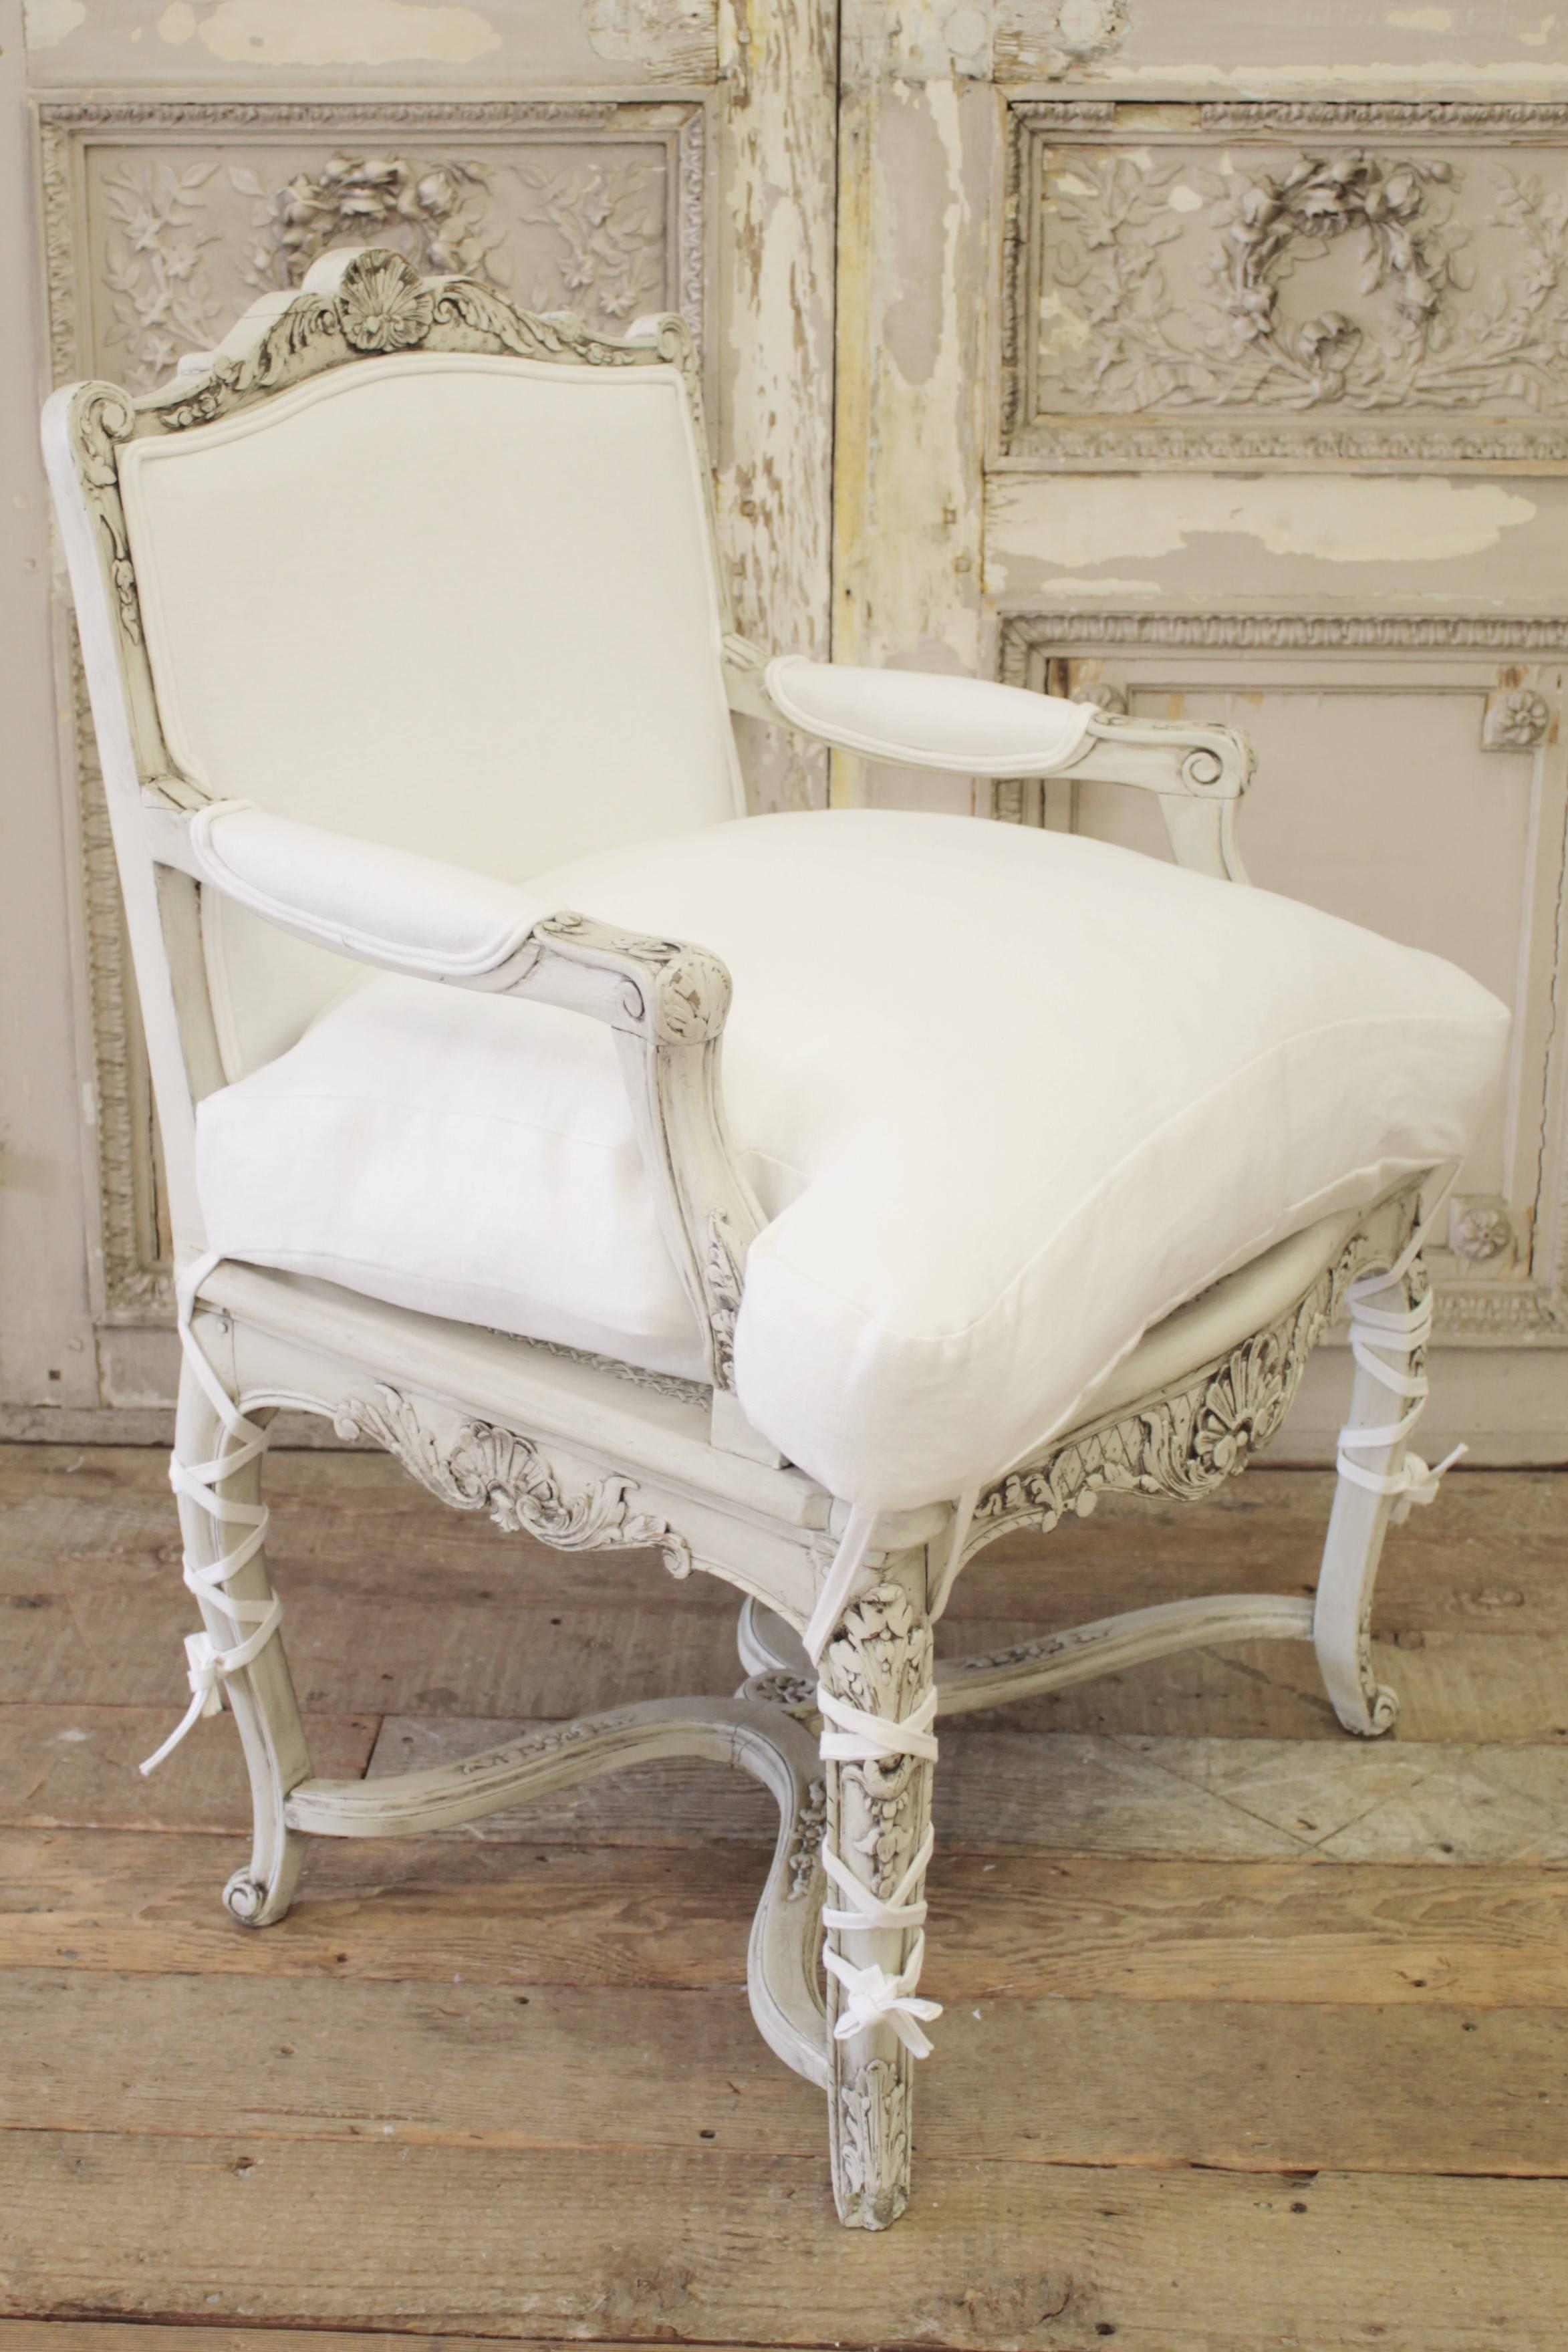 Painted in a soft oyster with subtle distressing, this hand-carved chair has the original cane seat, upholstered back and arms in 100% pure Belgian linen. The seat is slip covered down, with a ballet tie leg. The cushion cover has a zipper and can